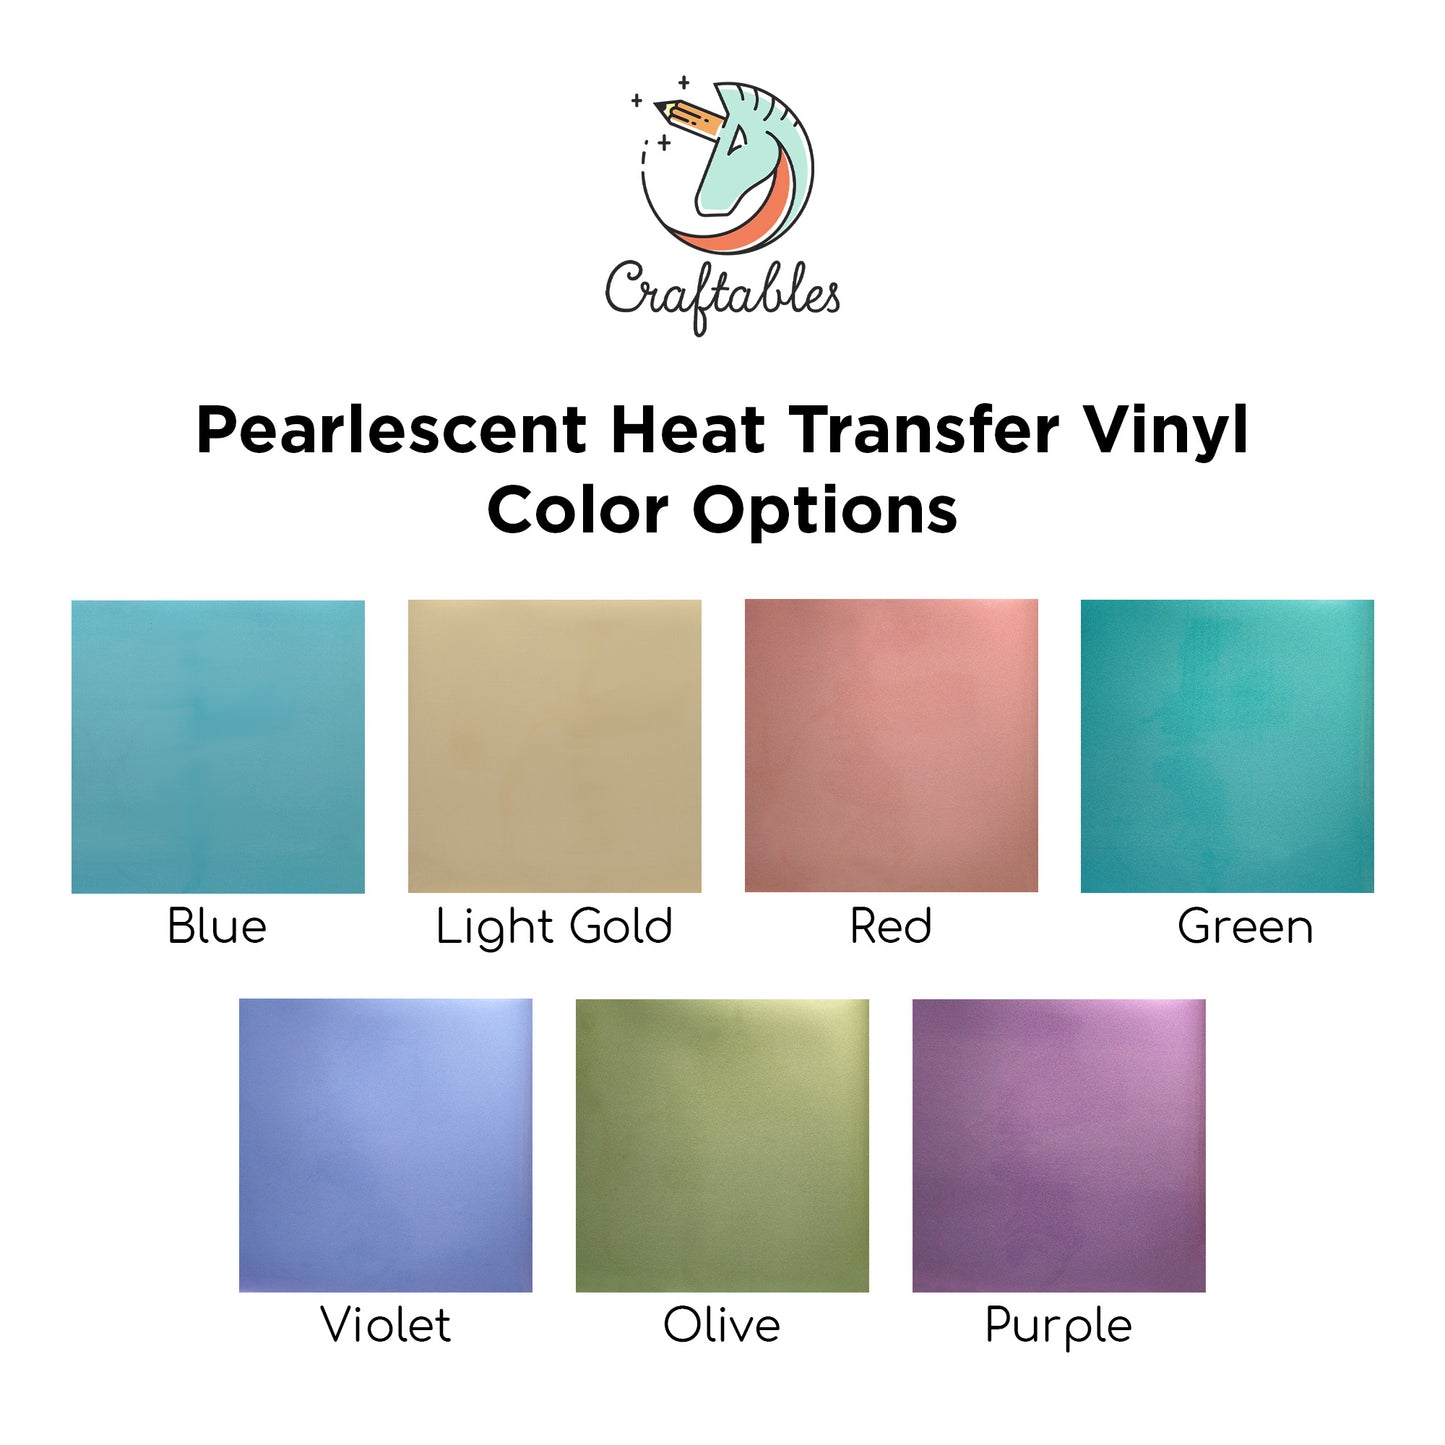 Blue Pearlescent Heat Transfer Vinyl Sheets By Craftables